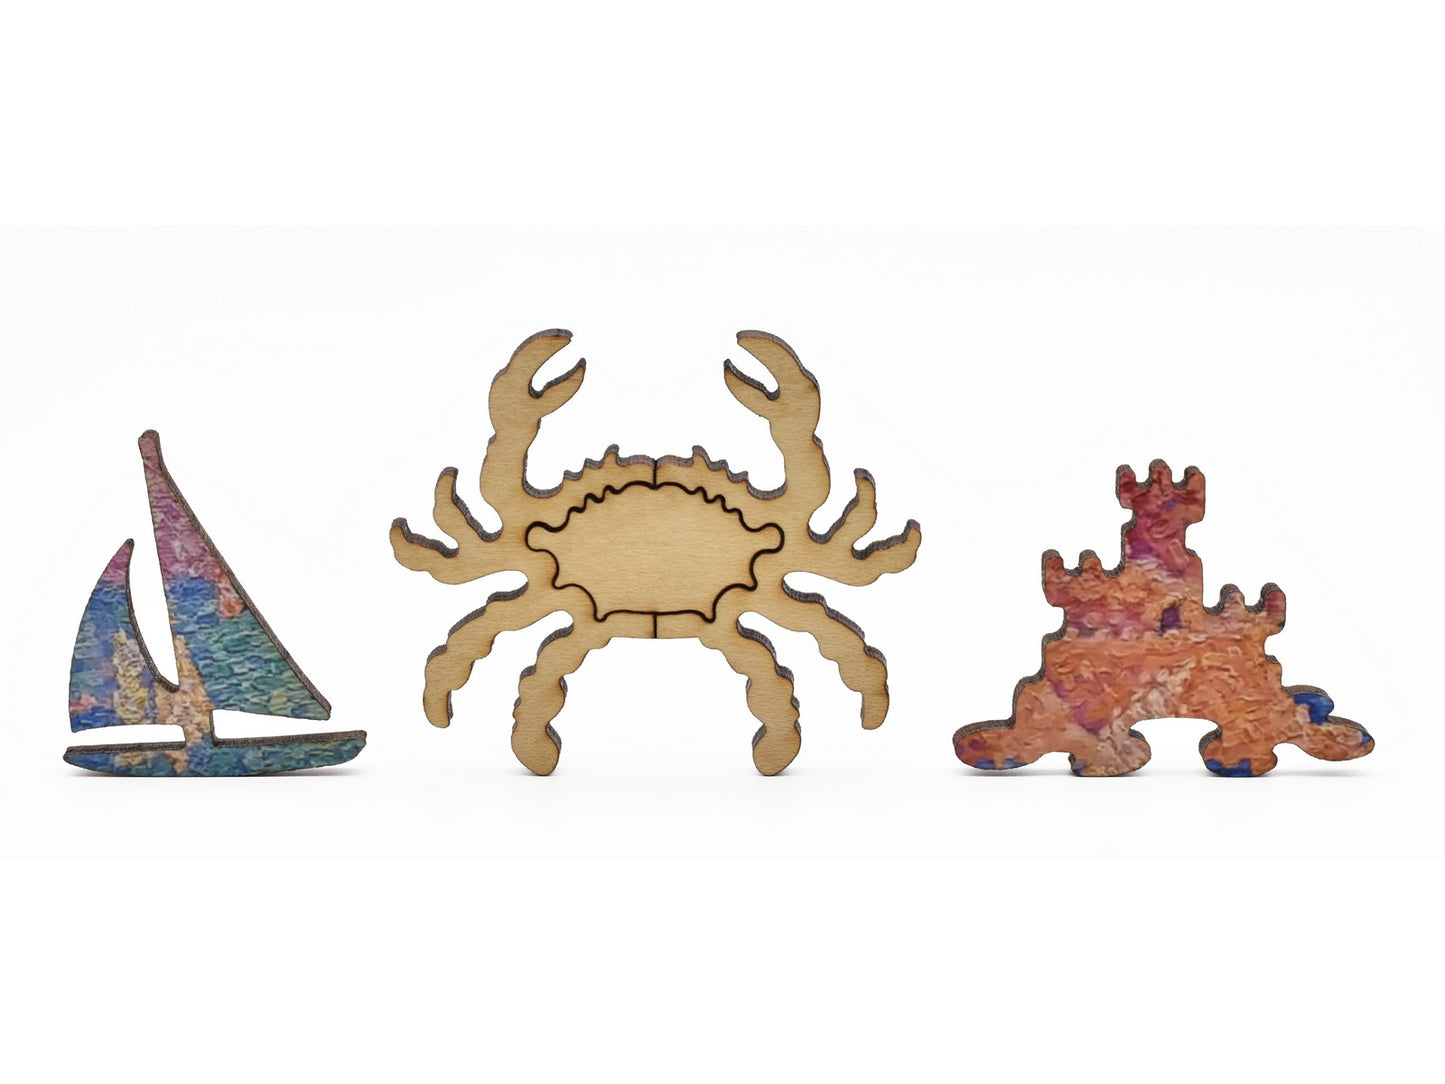 A closeup of pieces in the shape of a sailboat, a crab, and a sandcastle.